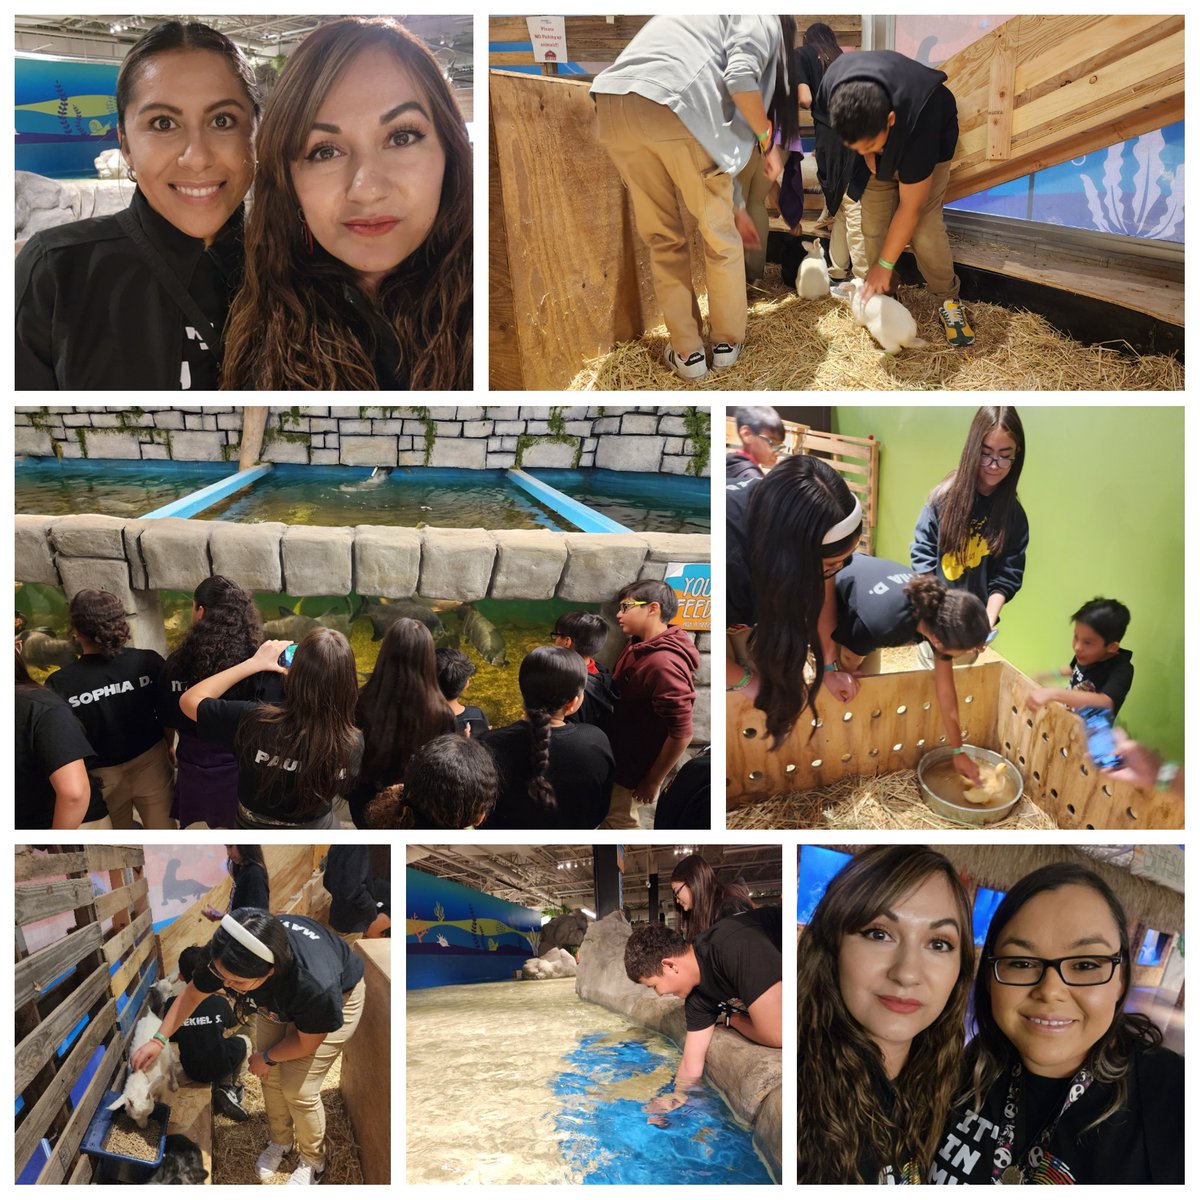 Our Spanish Club members had an excellent time at Jungle Reef. They learned about marine life and got to interact with some pretty awesome fish and farm animals. @aleseade2022